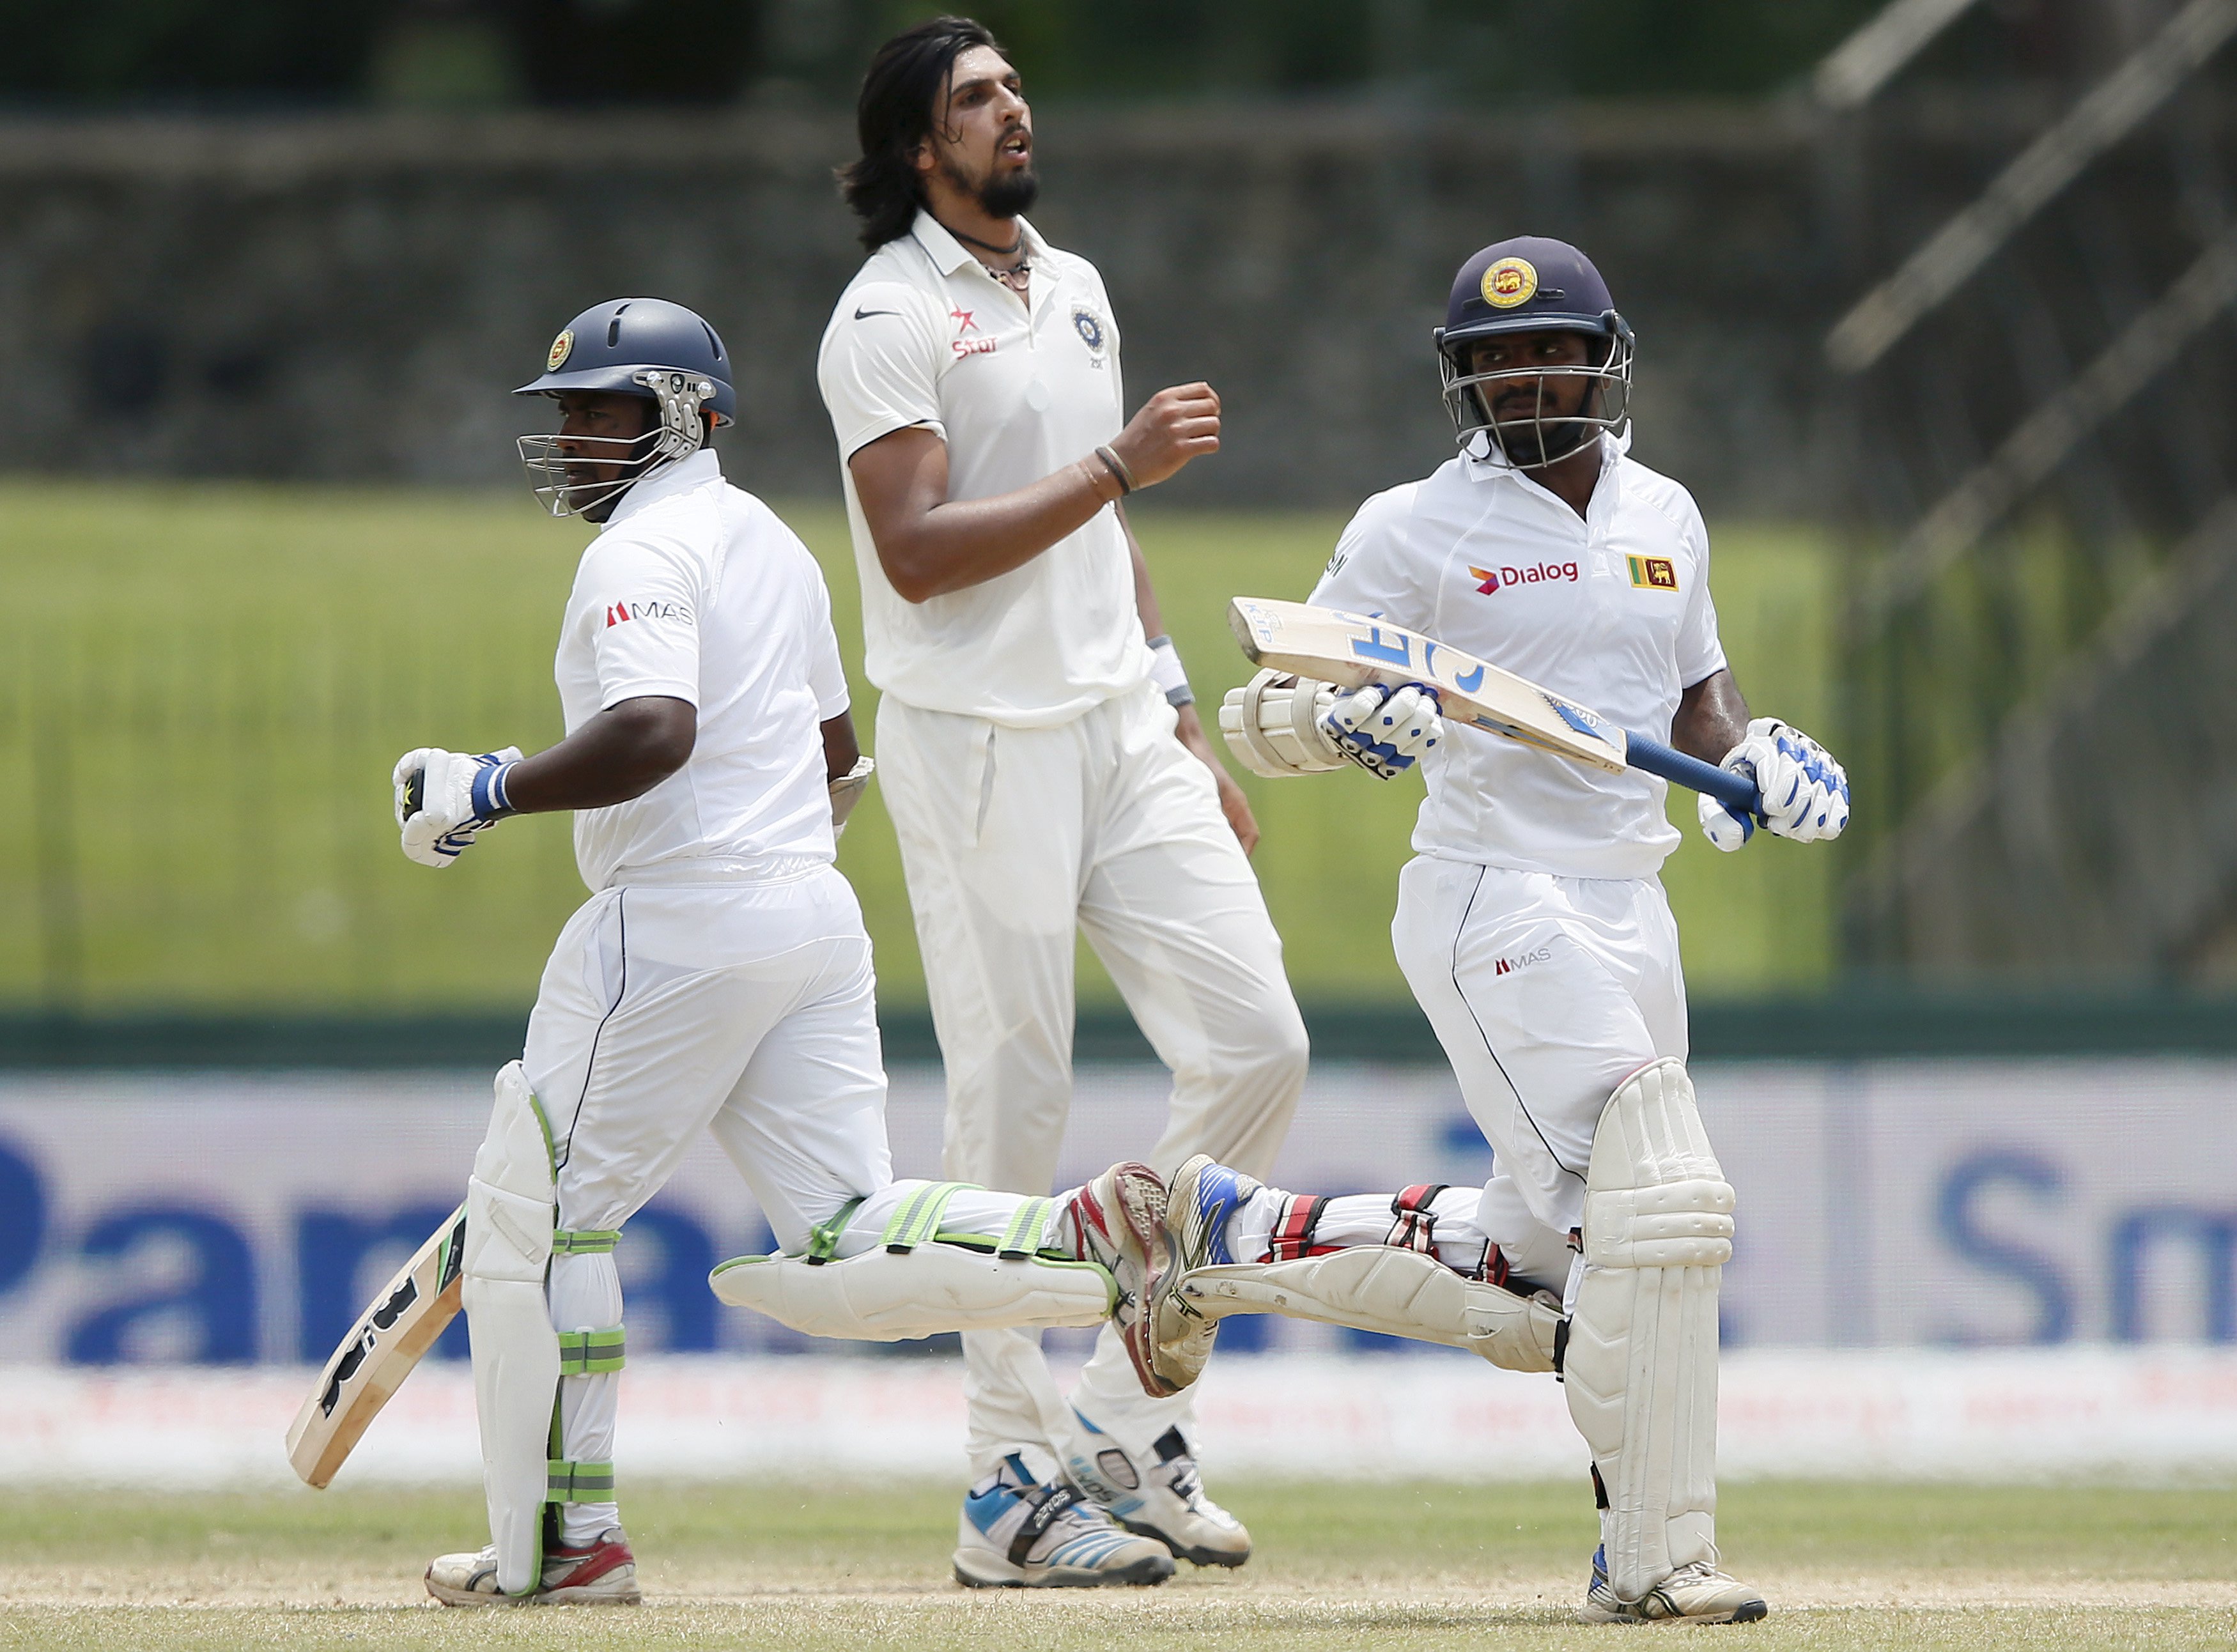     Sri Lanka's Rangana Herath (left) and Kusal Perera (right) run between wickets next to India's Ishant Sharma during the third day of their third and final test cricket match in Colombo, August 30, 2015. Photo: REUTERS